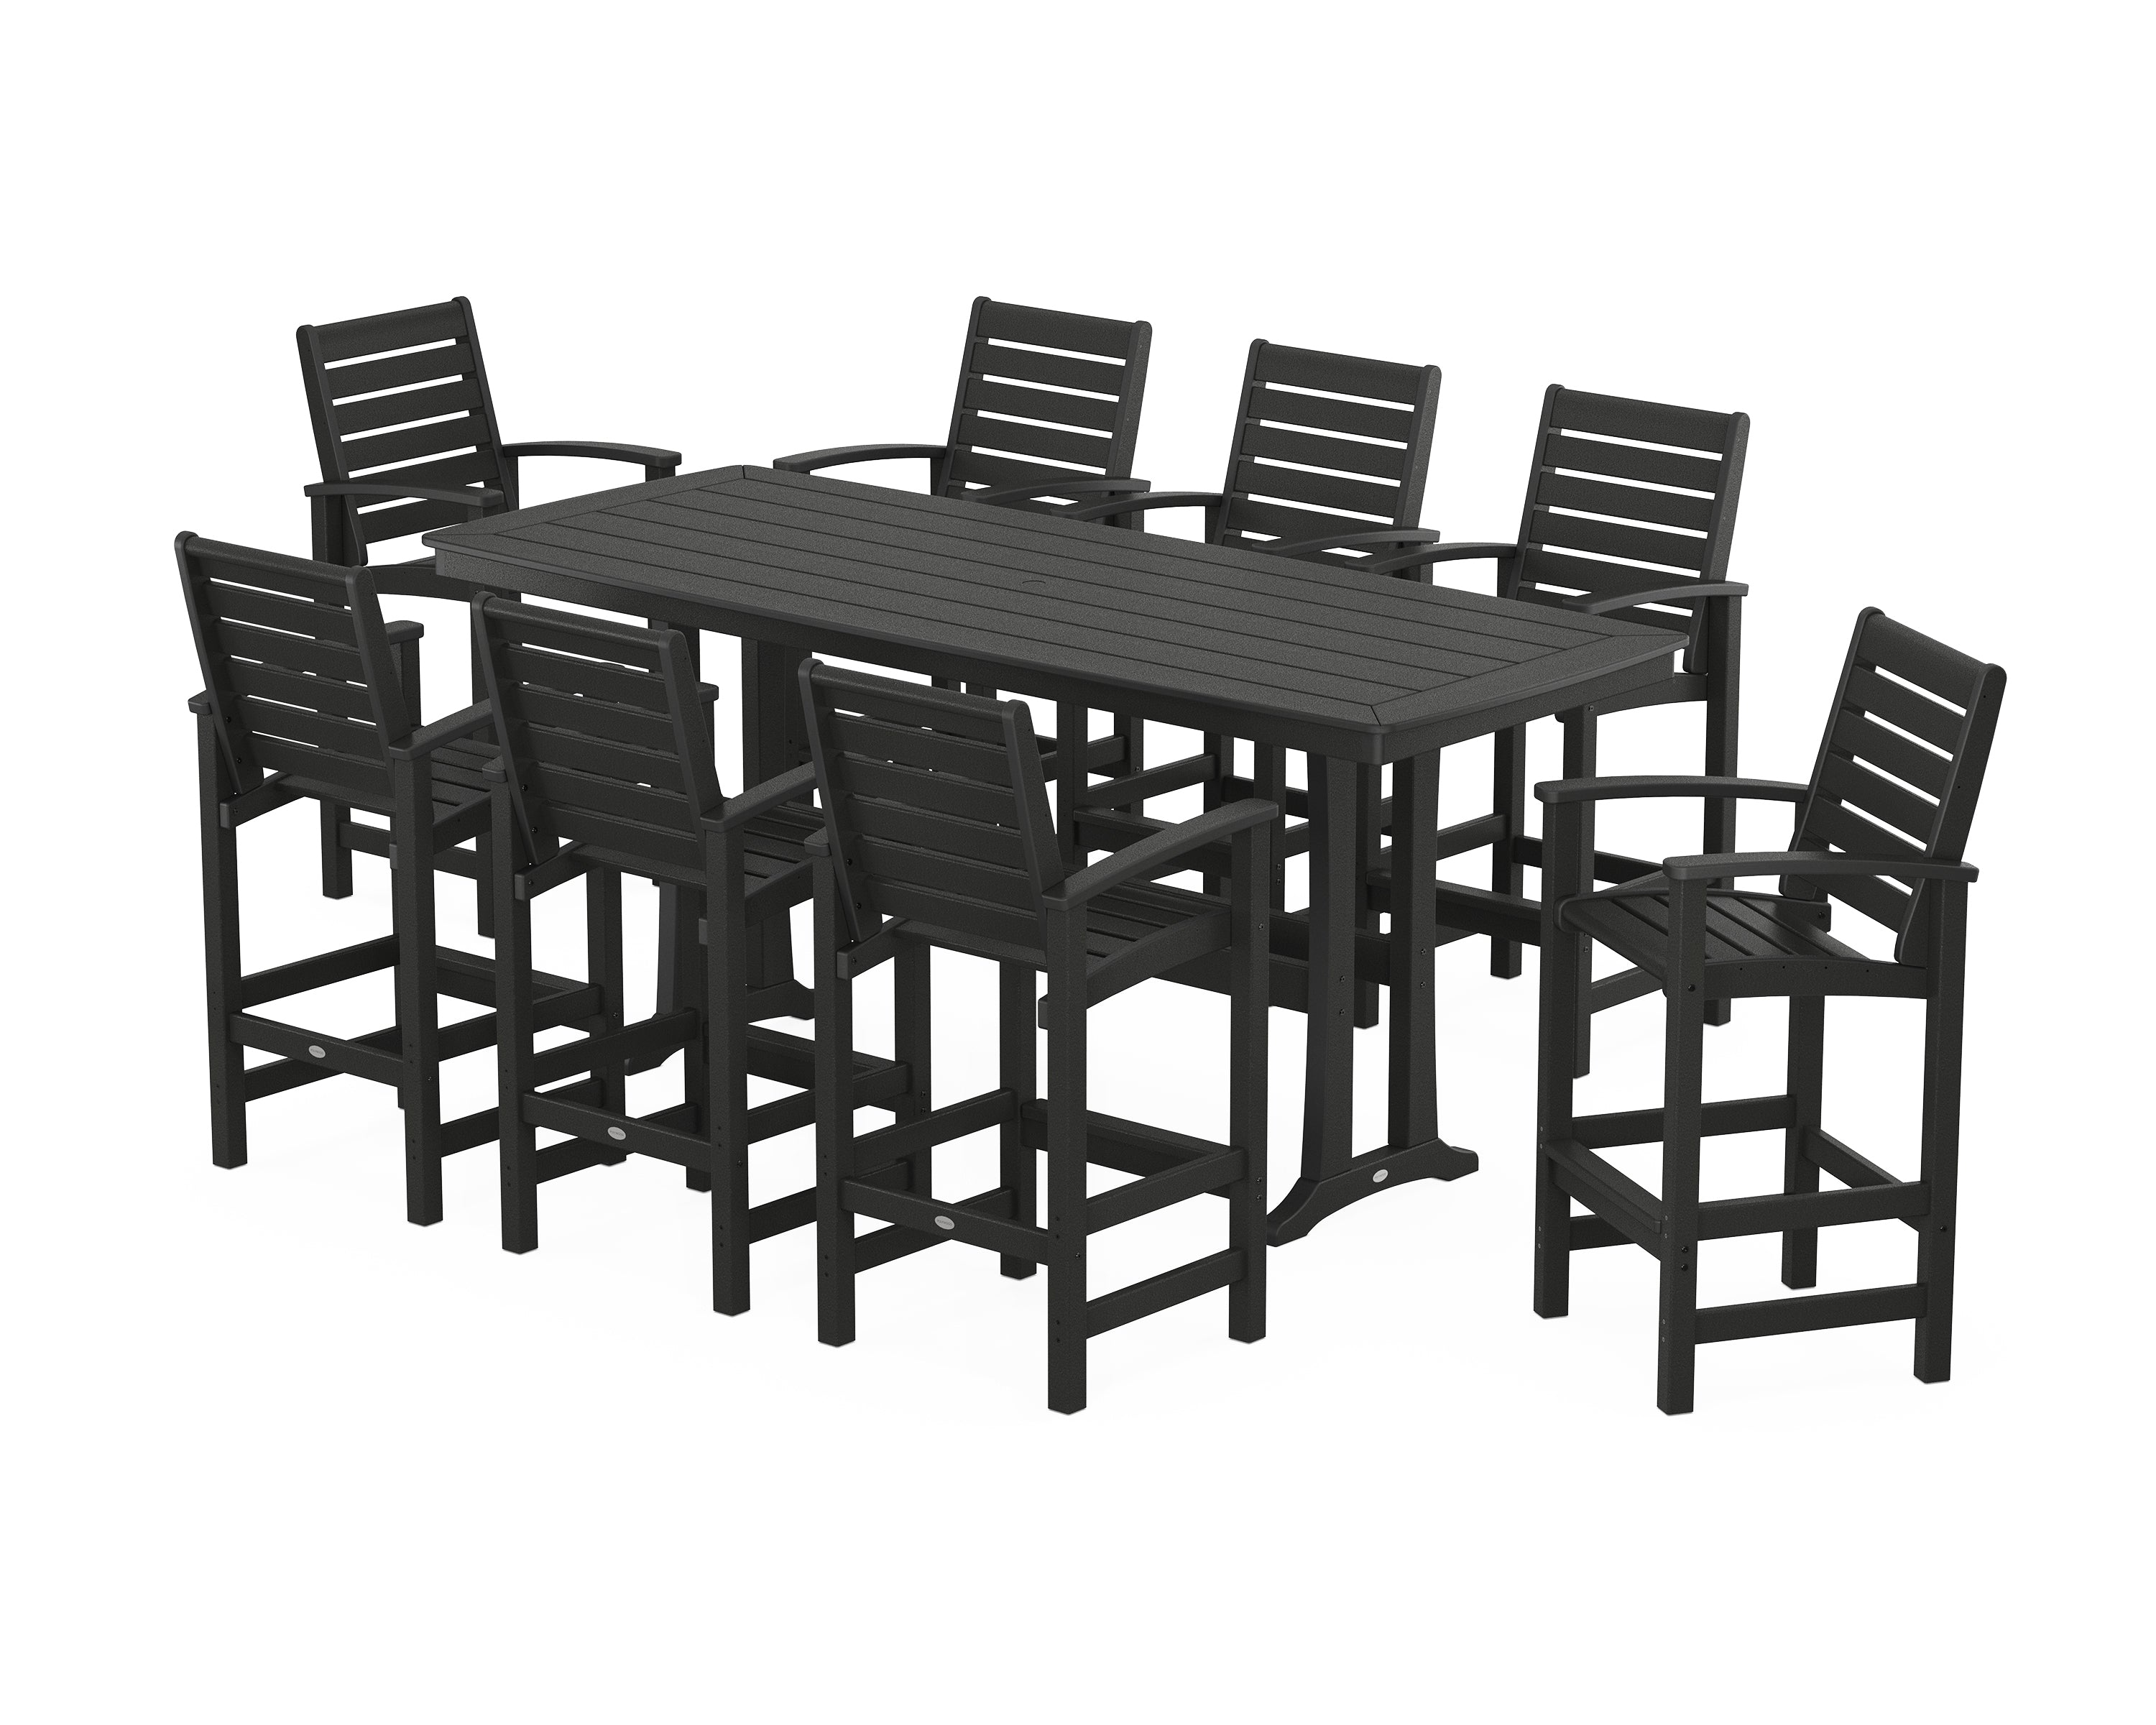 POLYWOOD® Signature 9-Piece Bar Set with Trestle Legs in Black